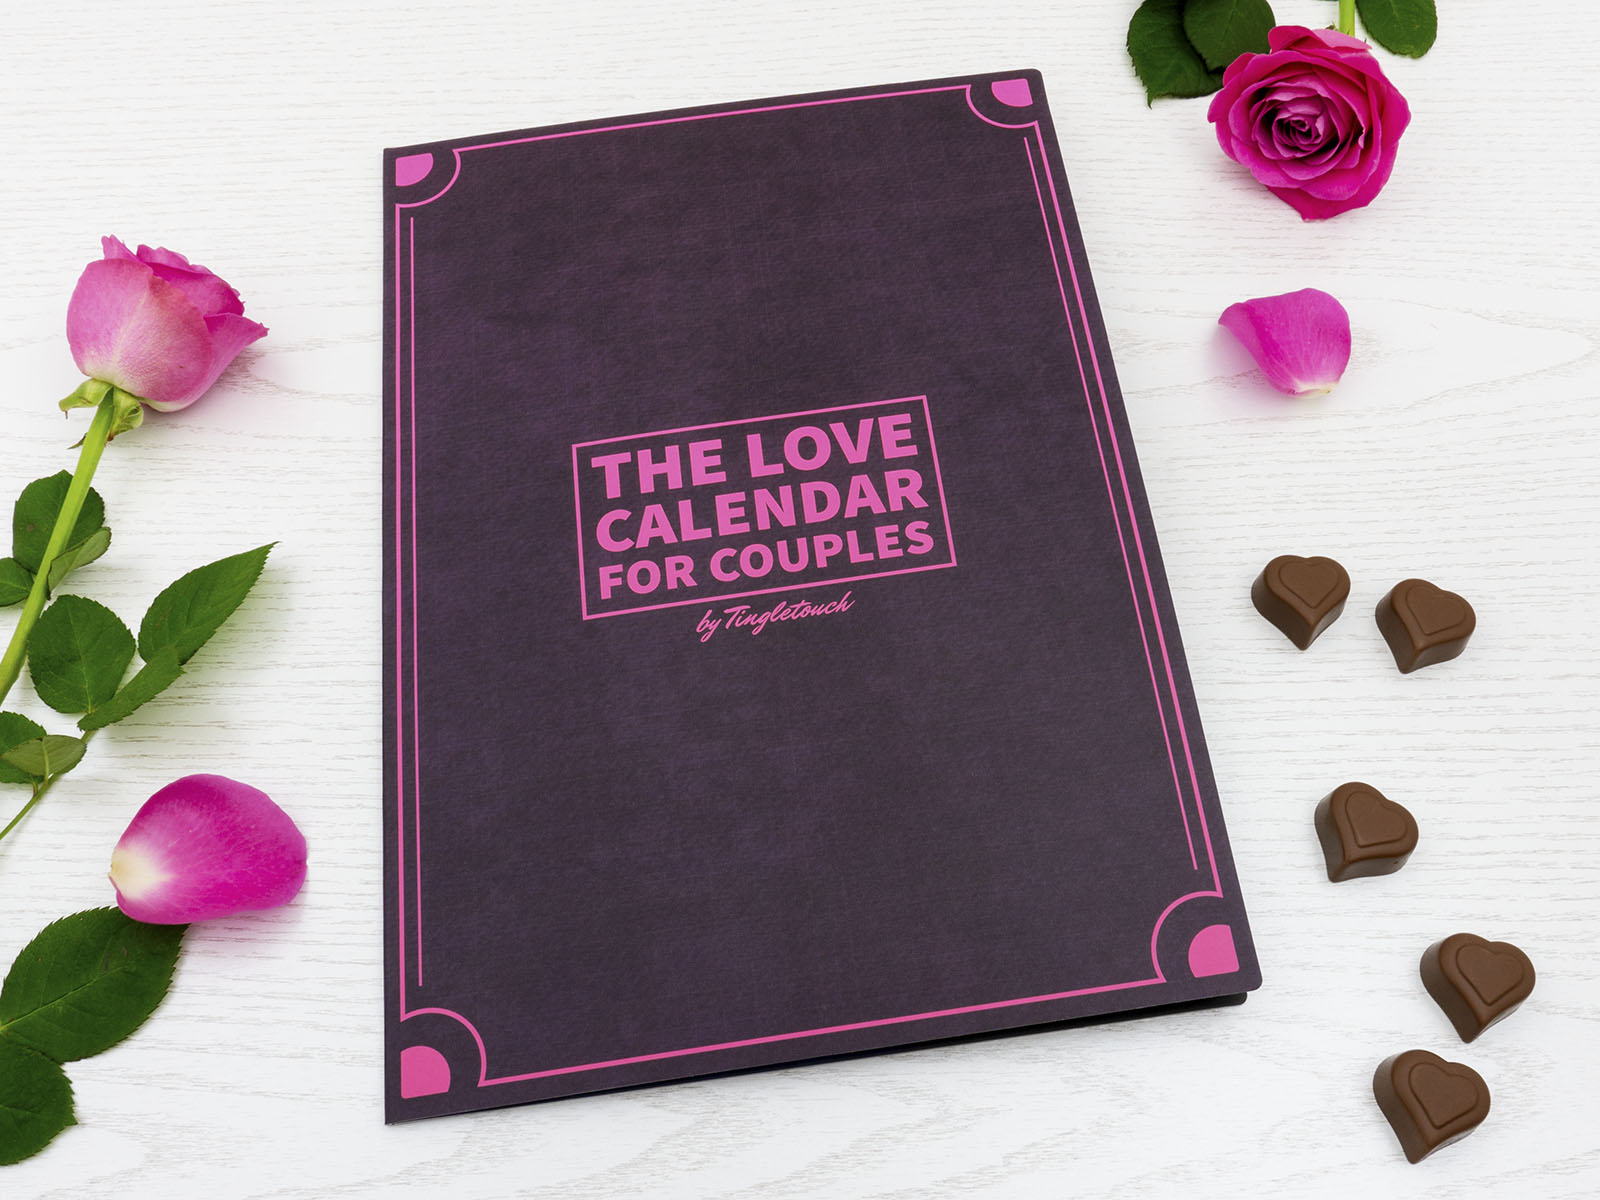 The Love Calendar for Couples - Front